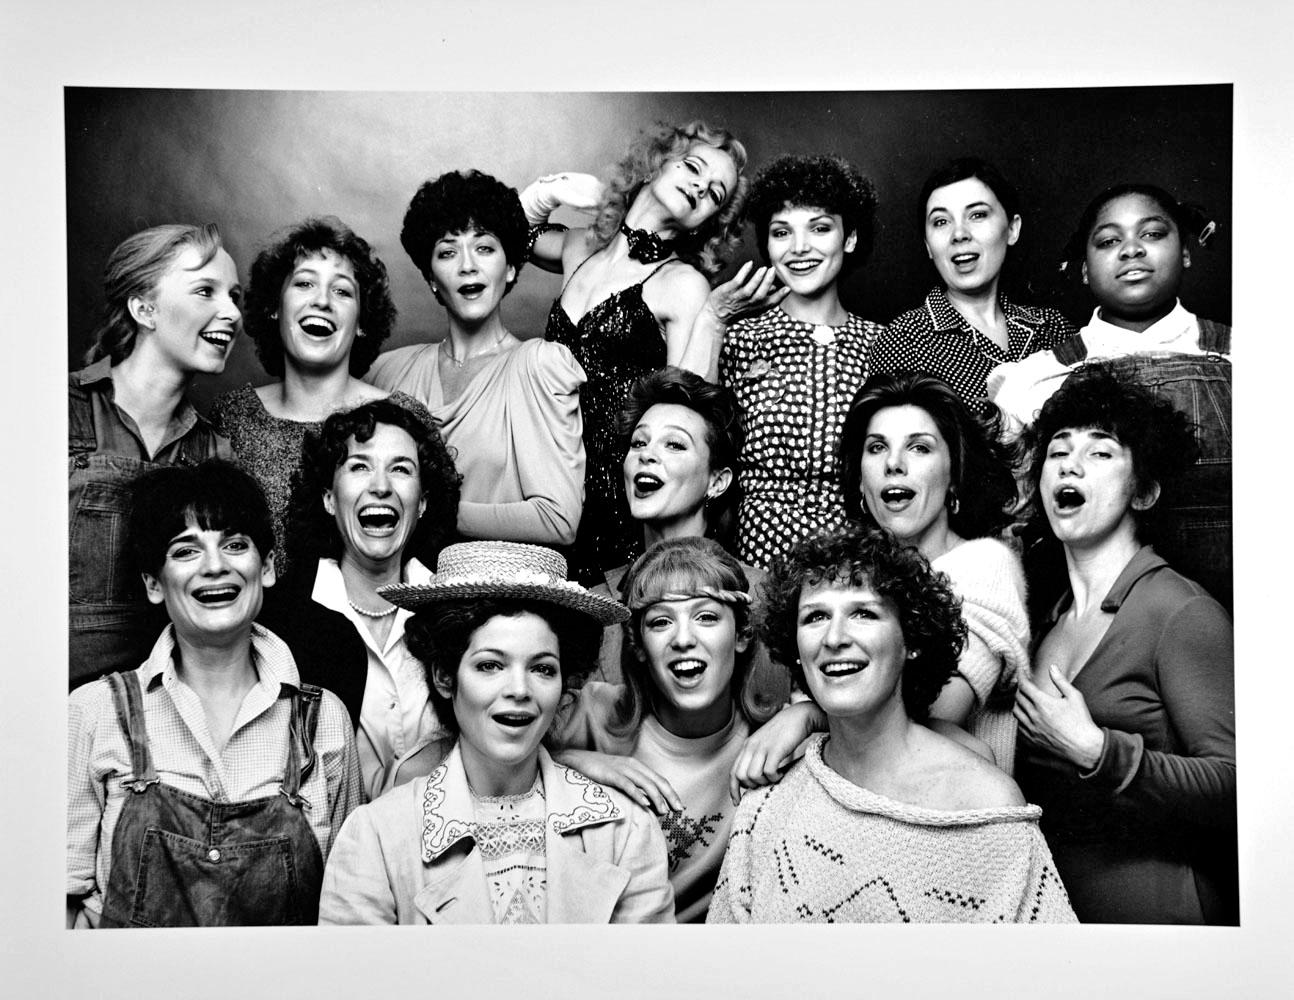 Jack Mitchell Black and White Photograph – Broadway Actresses-Gruppenfoto, Amy Irving, Laura Dean, Glenn Close